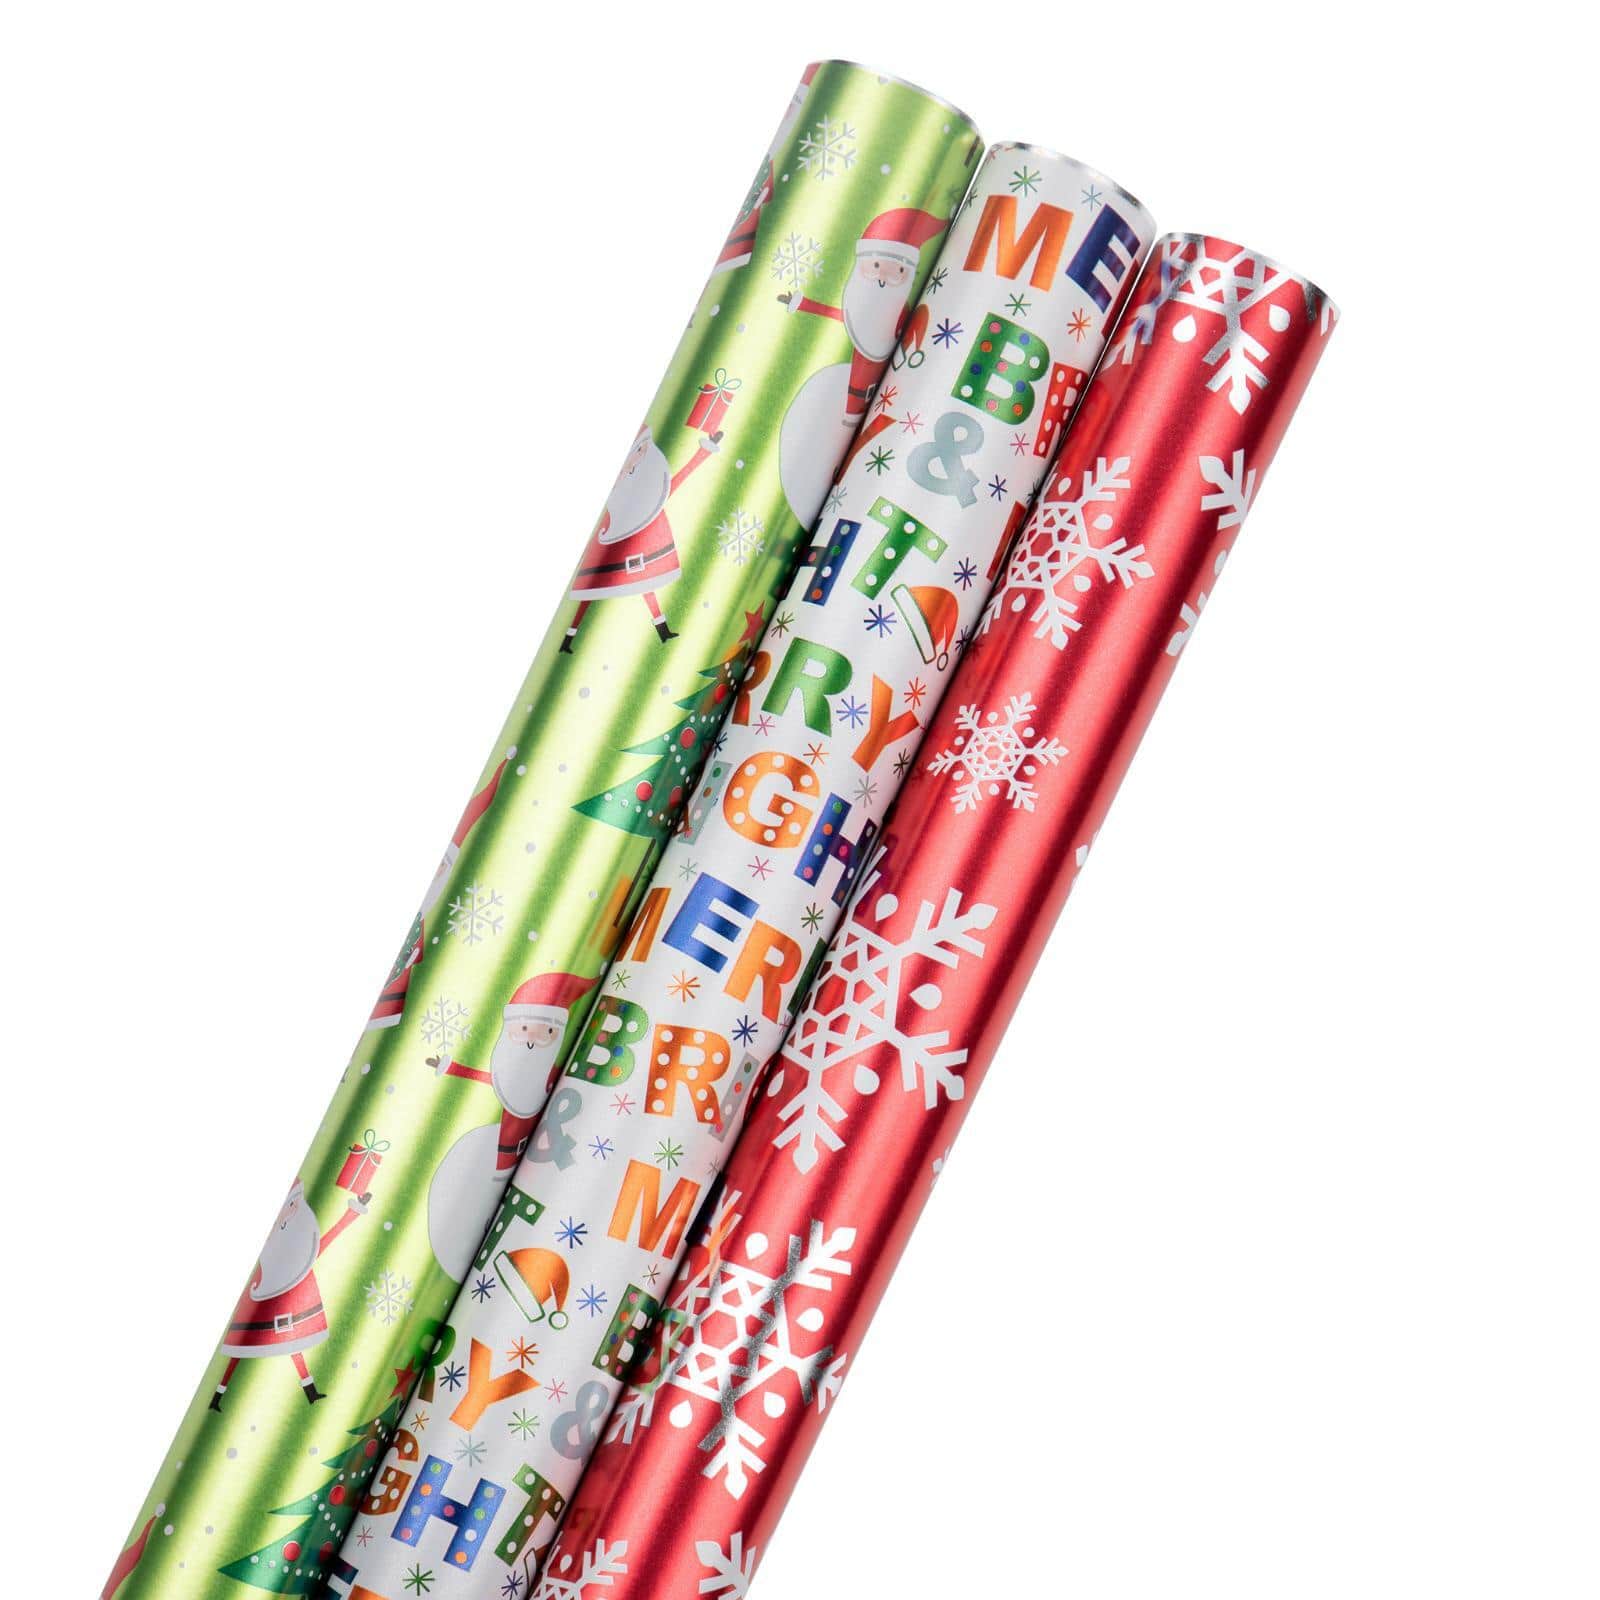 JAM Paper & Envelope 2ct Striped Gift Wrap Rolls Red/White